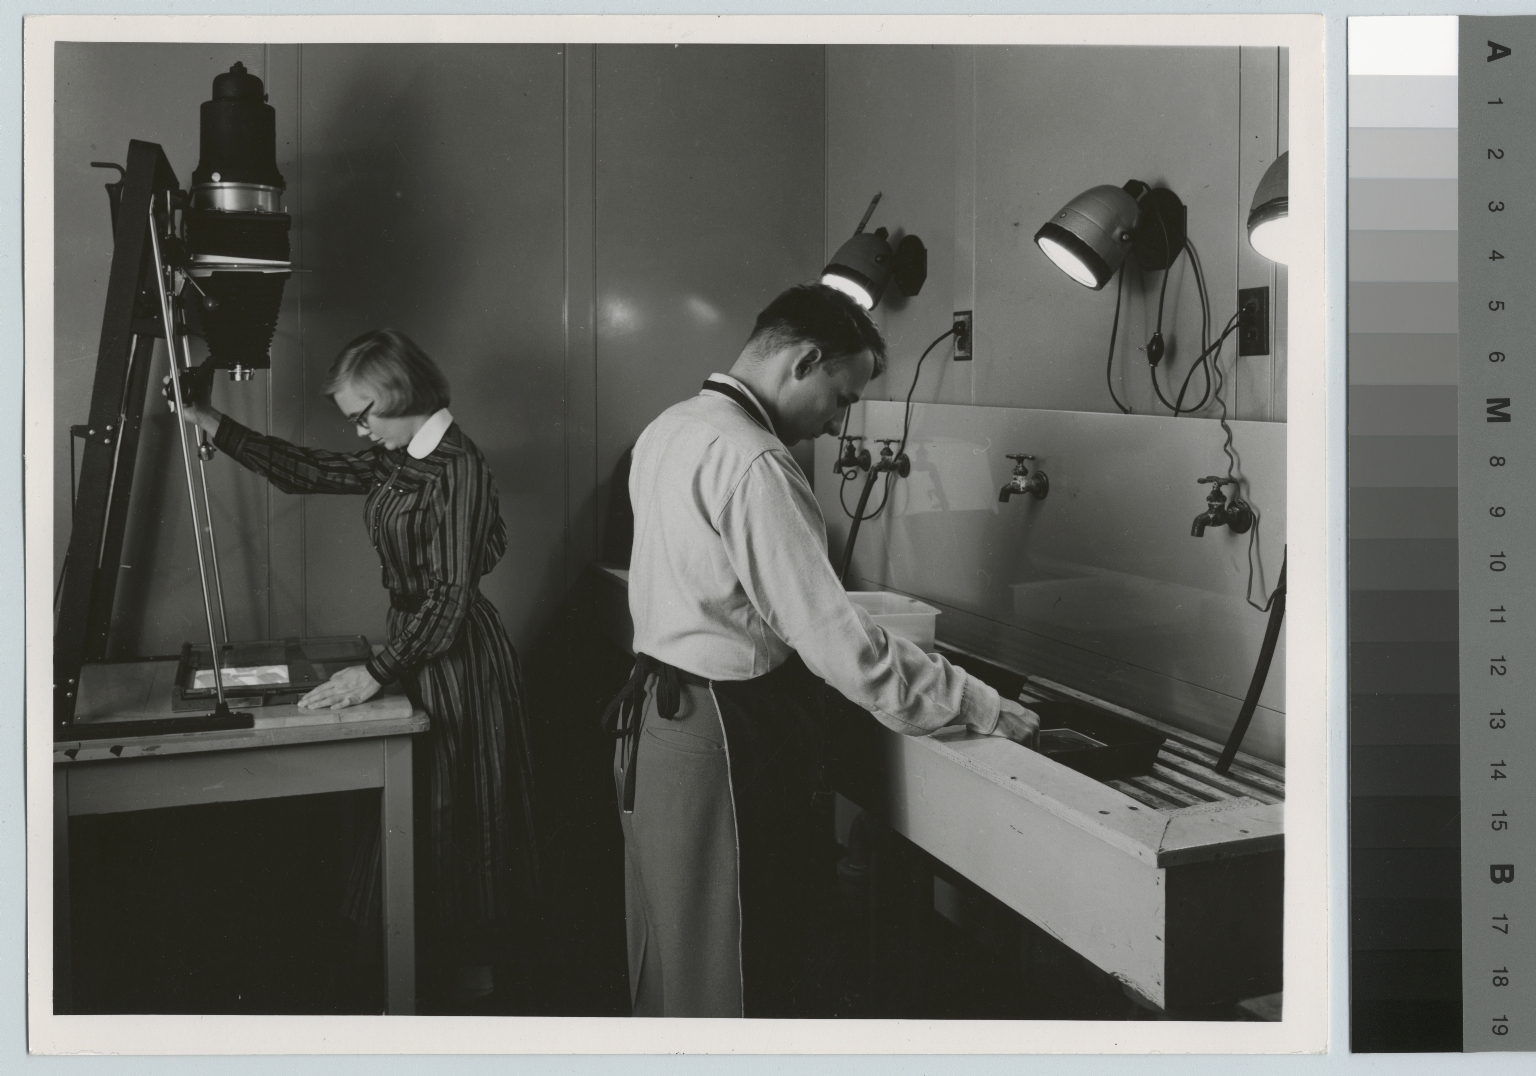 Darkroom facilities, Department of Photographic Technology, Rochester Institute of Technology